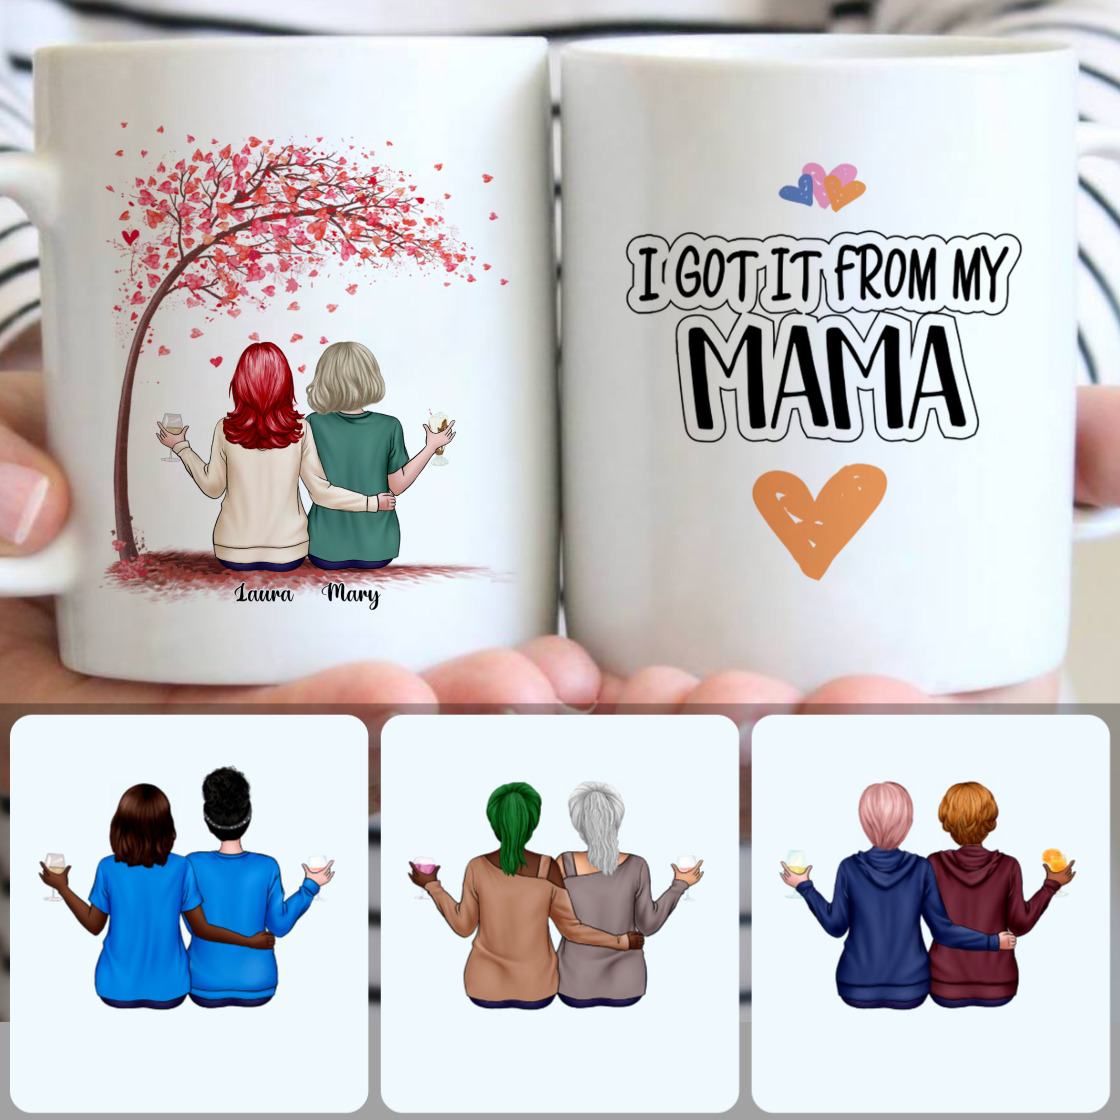 Personalized Mug, Perfect Gifts For Mom, Mother & Daughter Customized Coffee Mug With Names